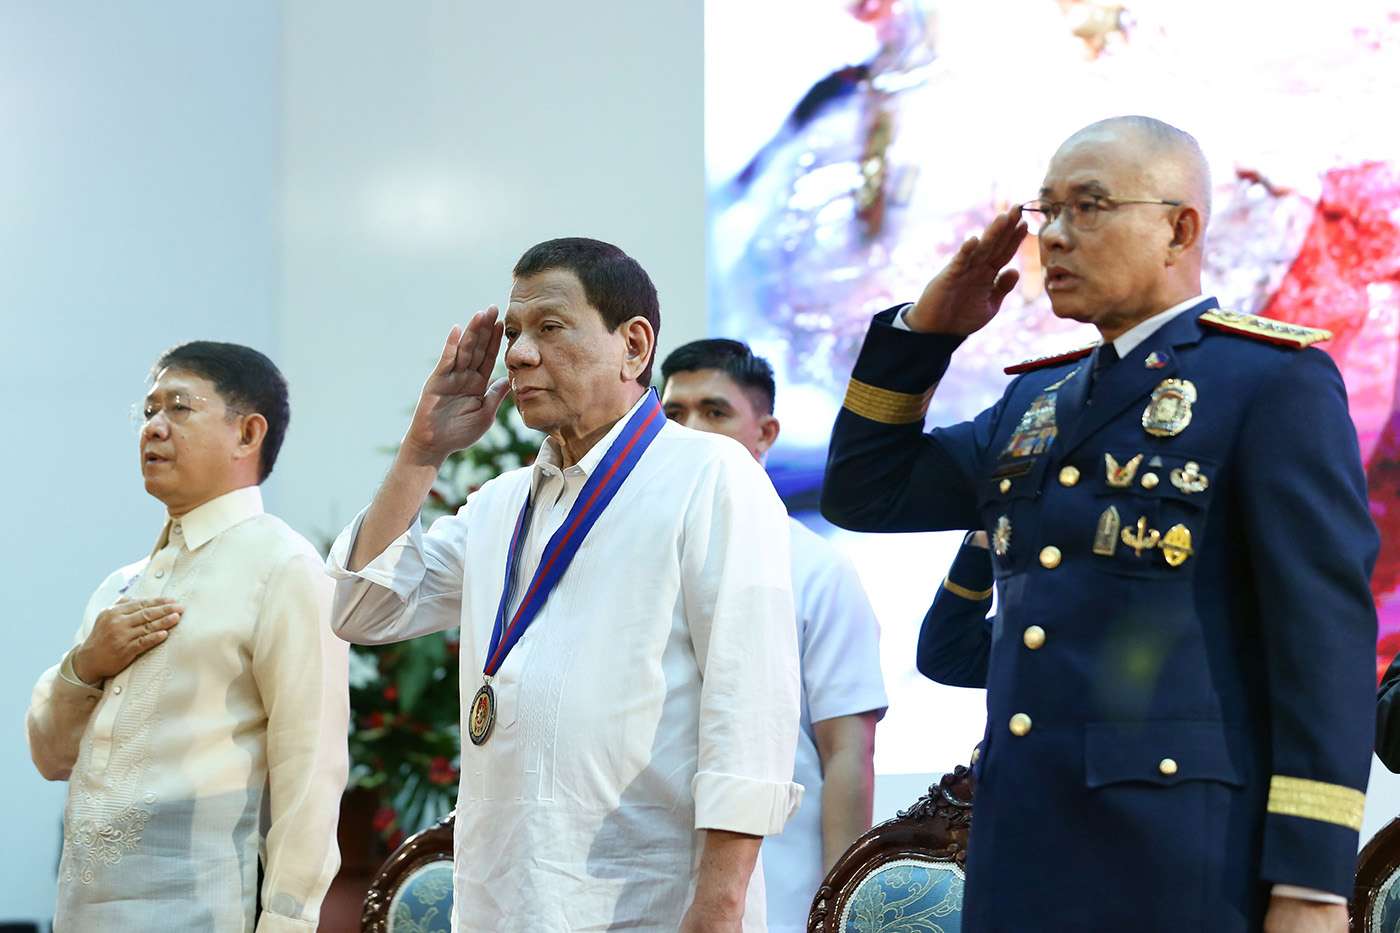 PNP ANNIVERSARY. President Rodrigo Duterte attends the 118th Service Anniversary of the Philippine National Police on August 9, 2019. With the President are Interior and Local Government Secretary Eduardo Año and PNP chief General Oscar Albayalde. Malacañang photo 